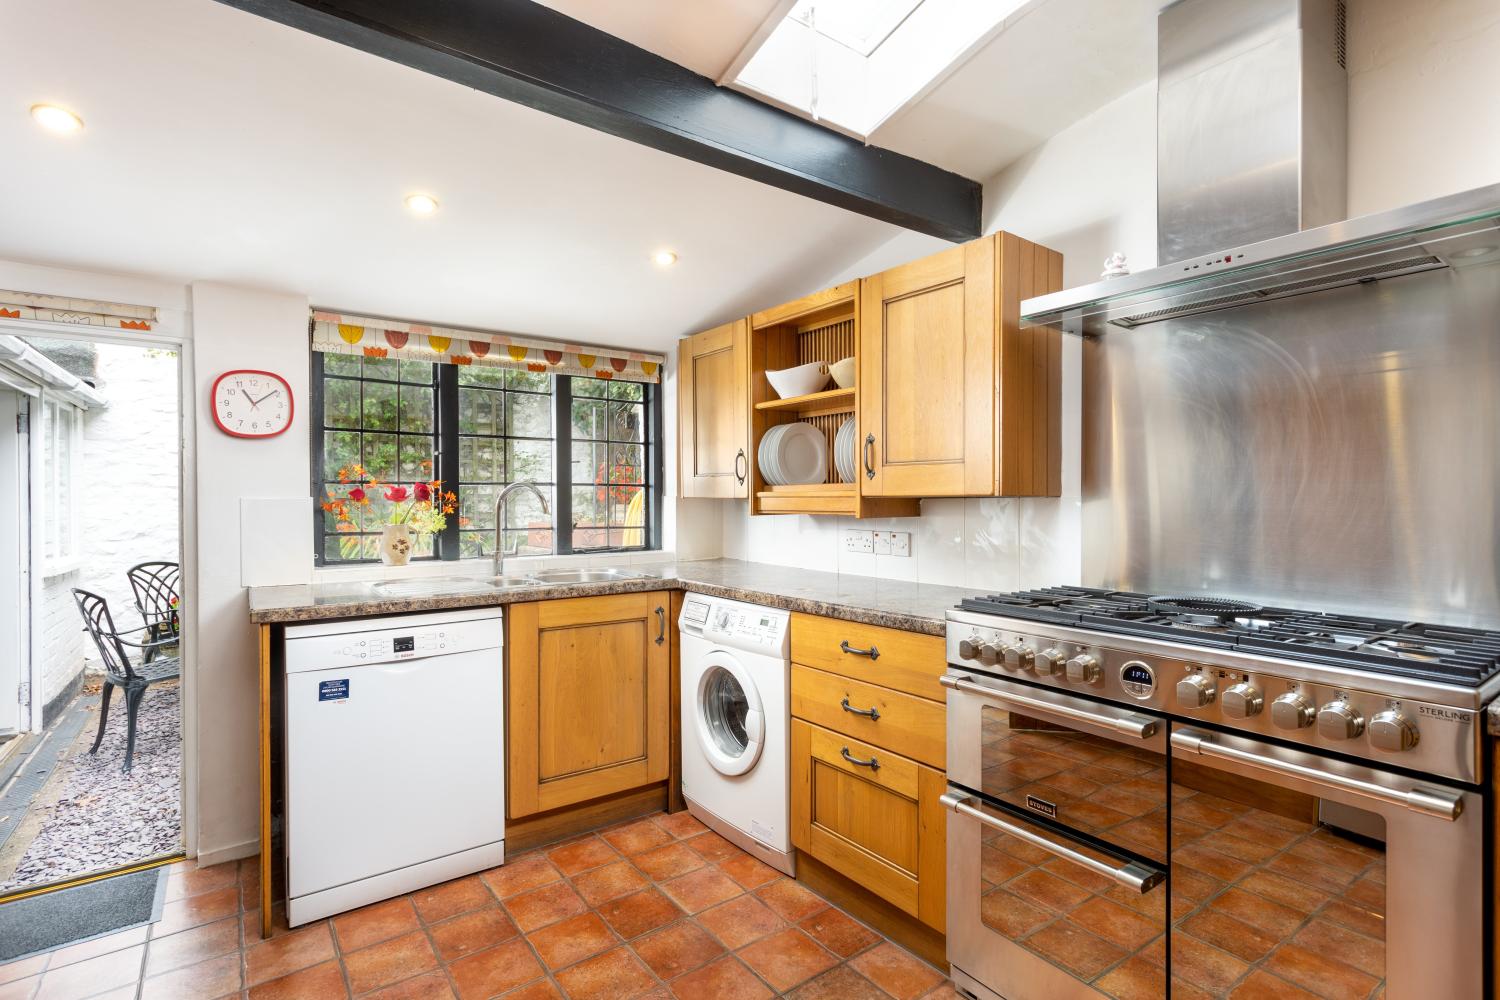 There's a large dual fuel range cooker, washing machine and dishwasher in the kitchen.